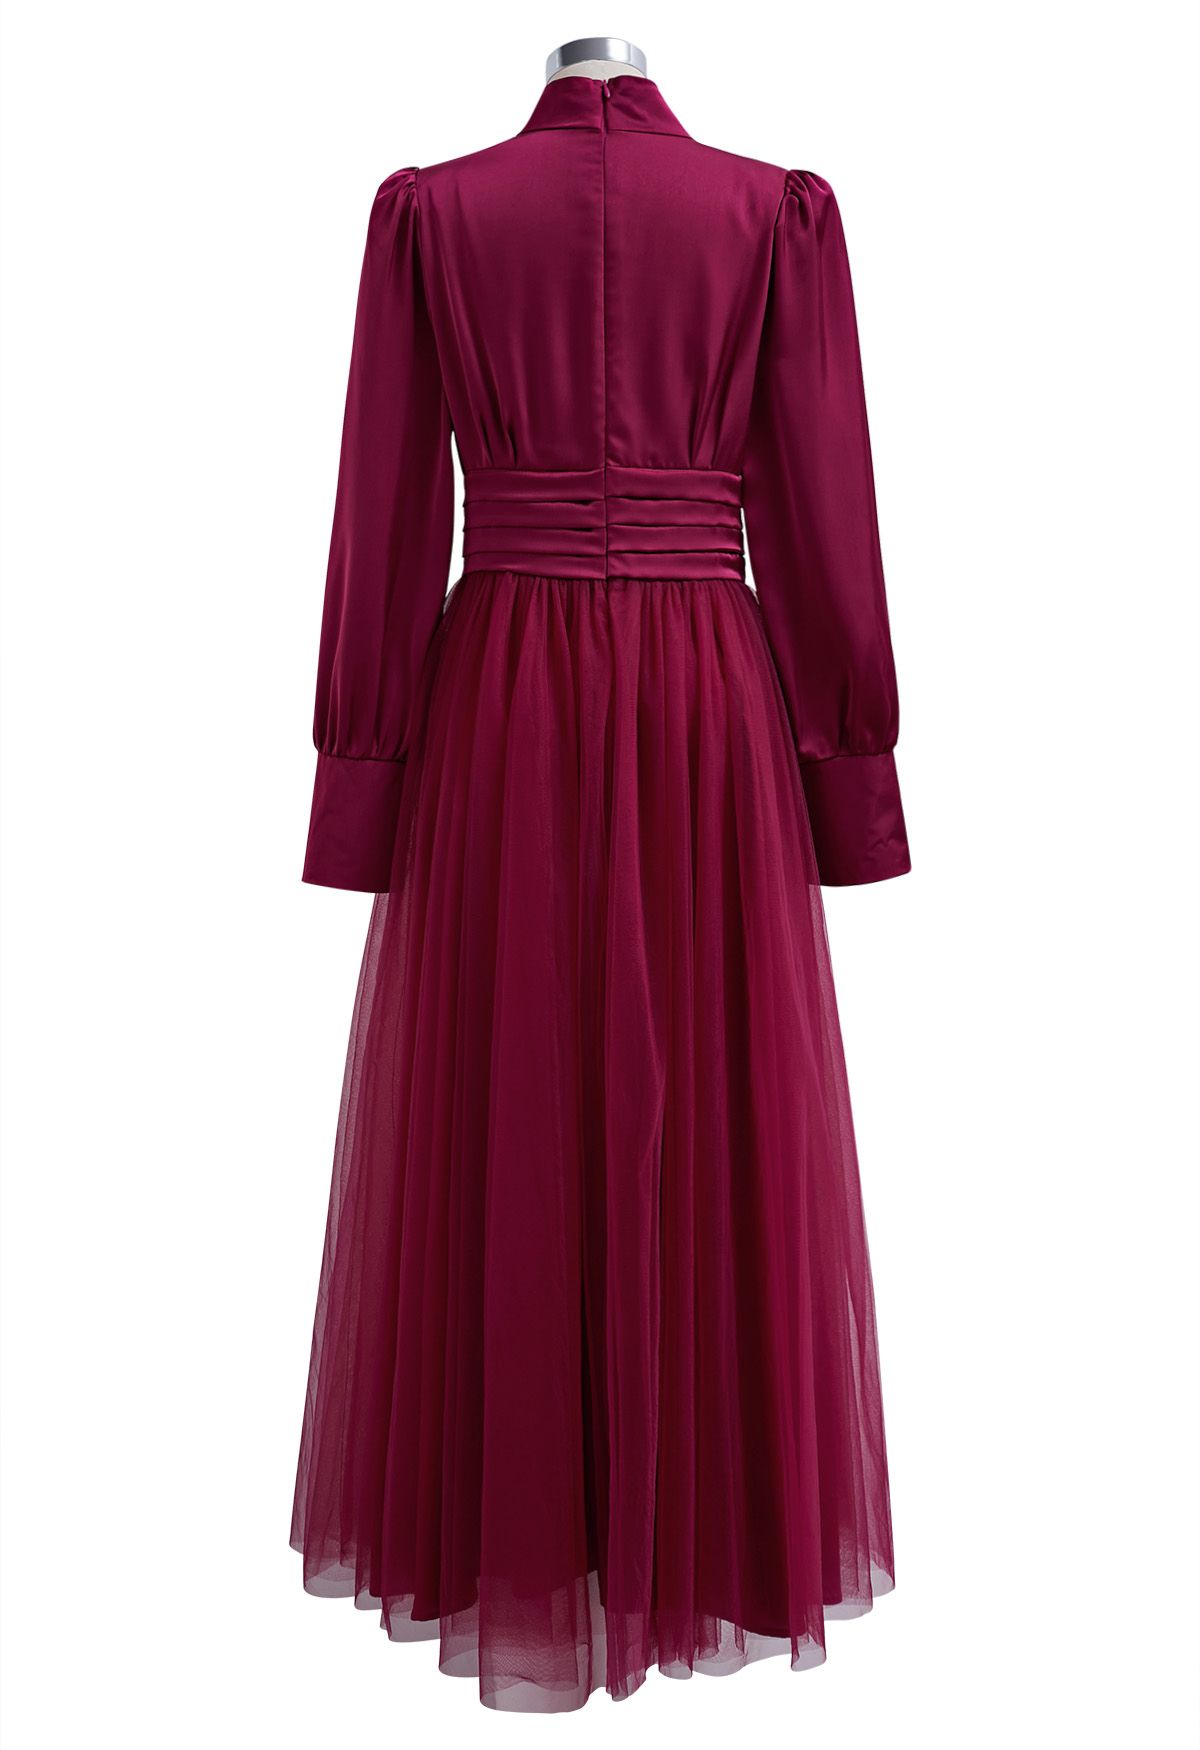 Shine Bright High Neck Tulle Maxi Dress in Burgundy